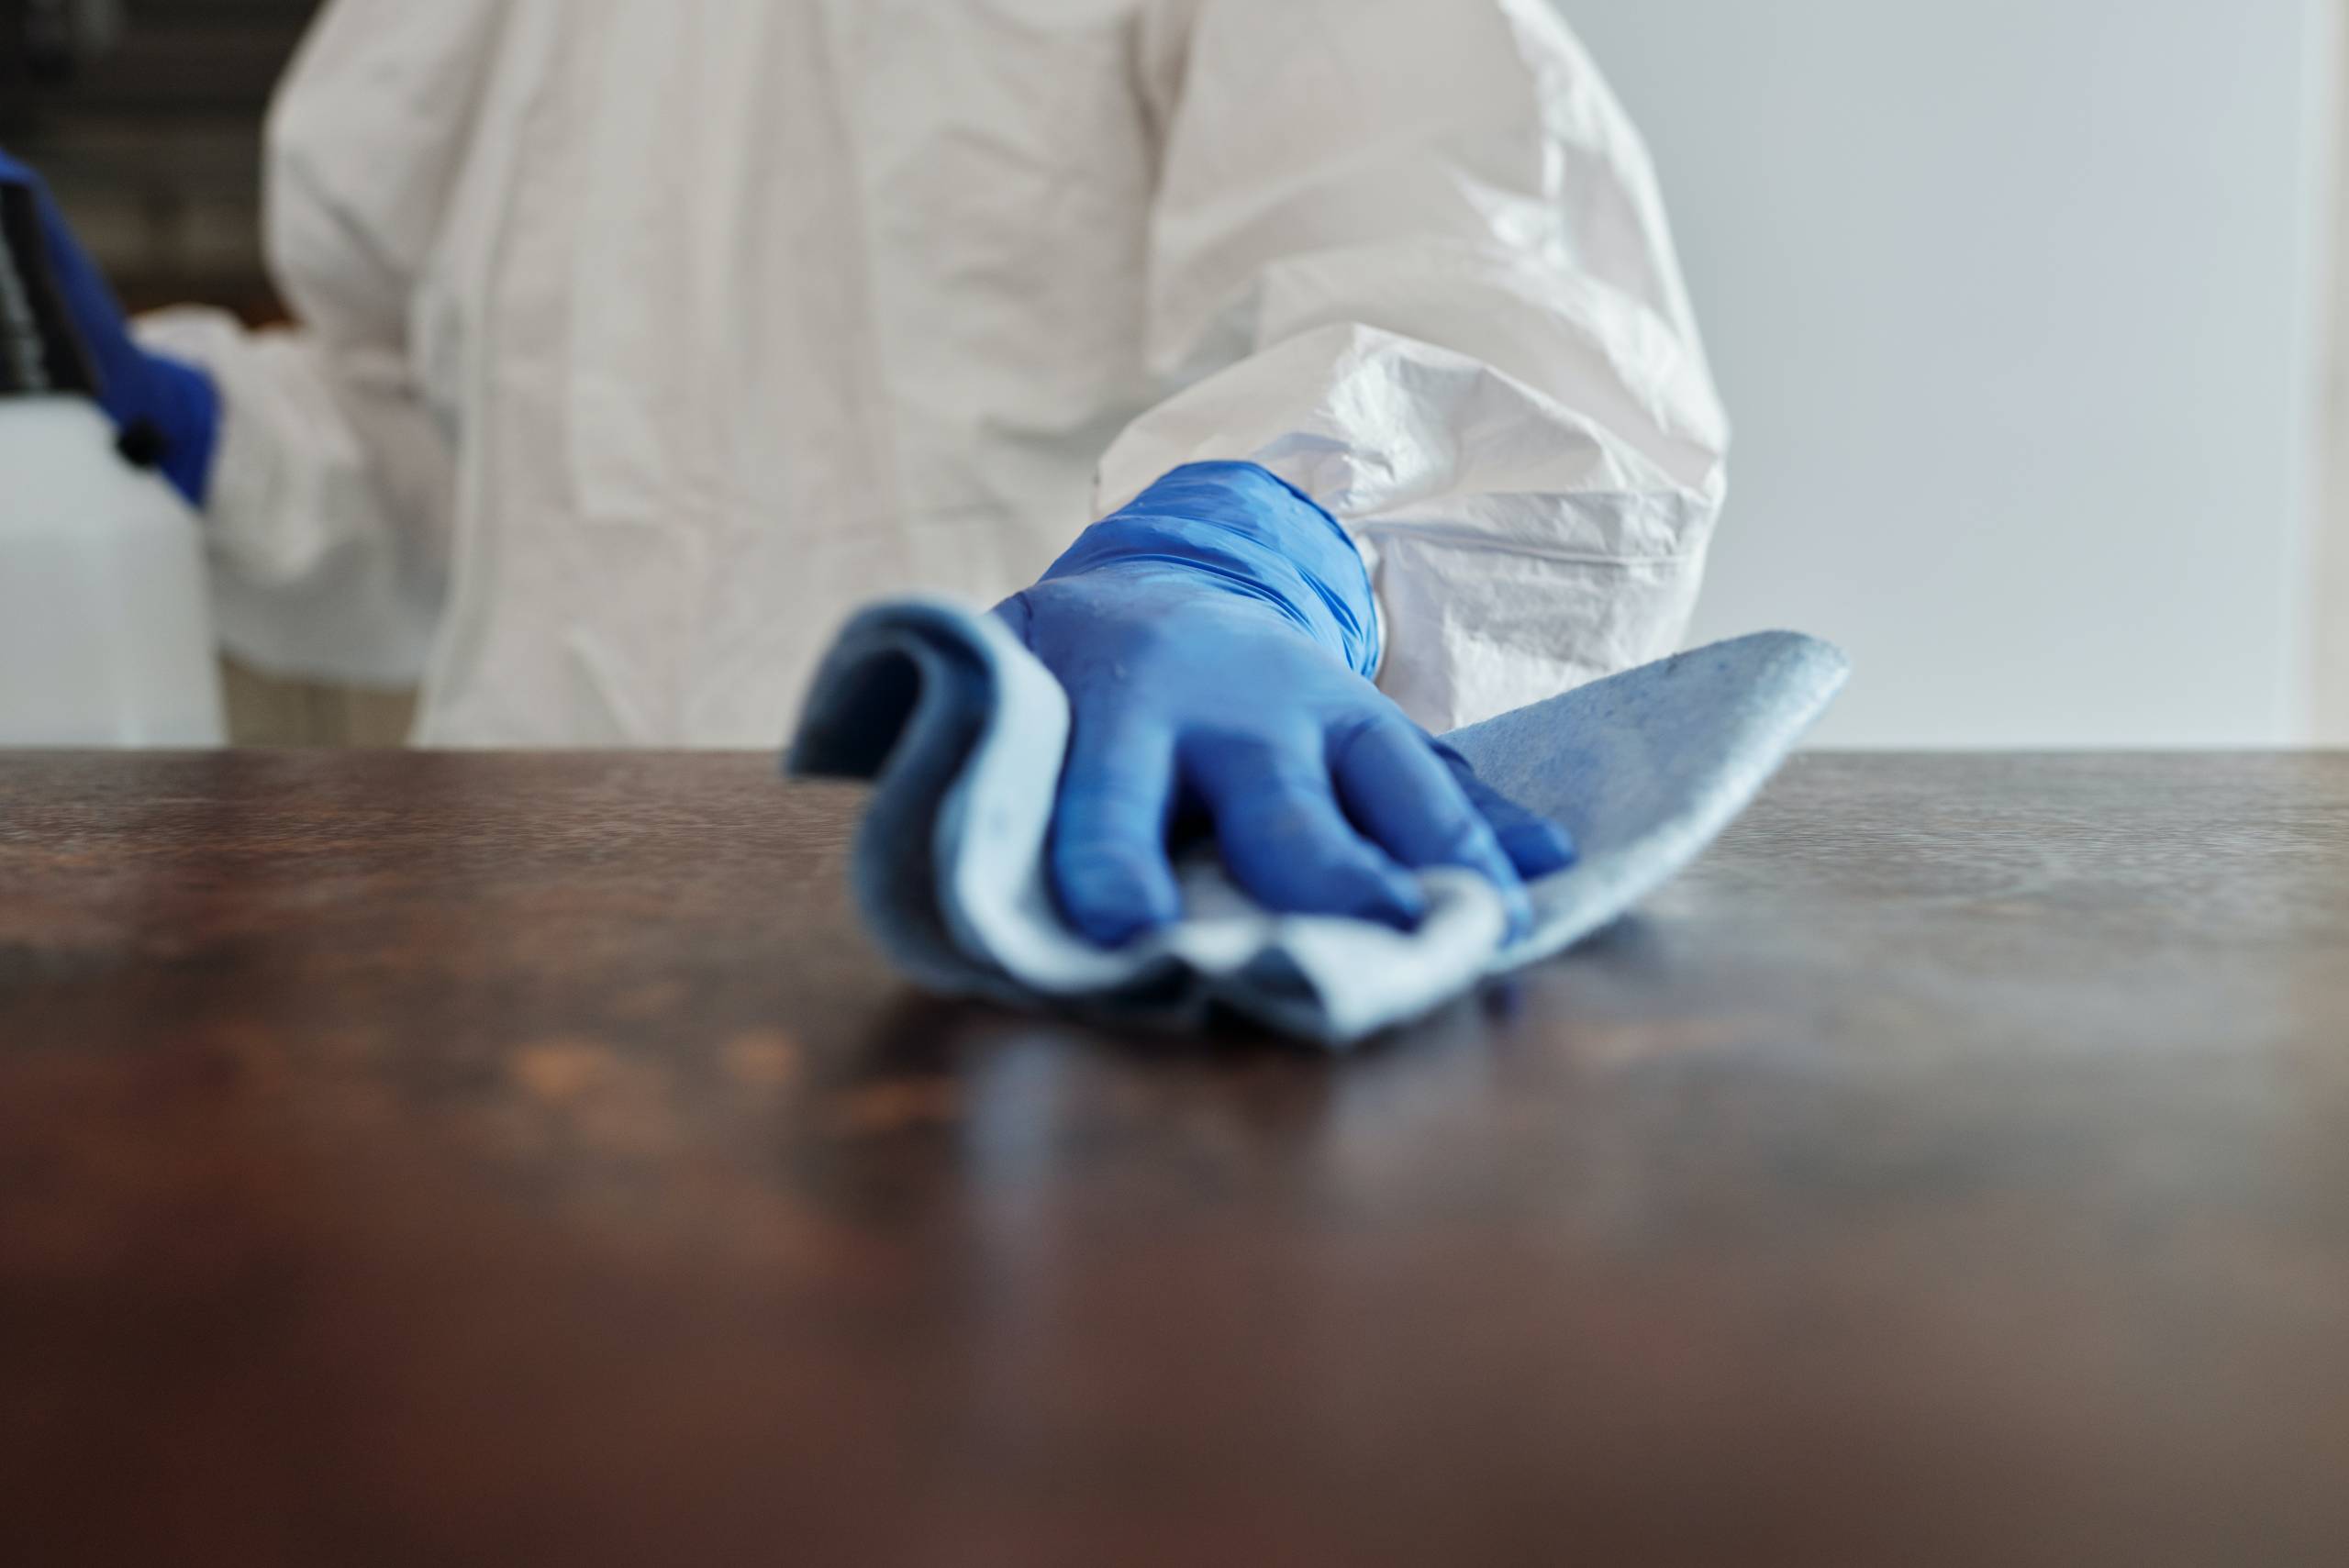 A person wearing personal protective equipment wipes down a table in an indoor setting.